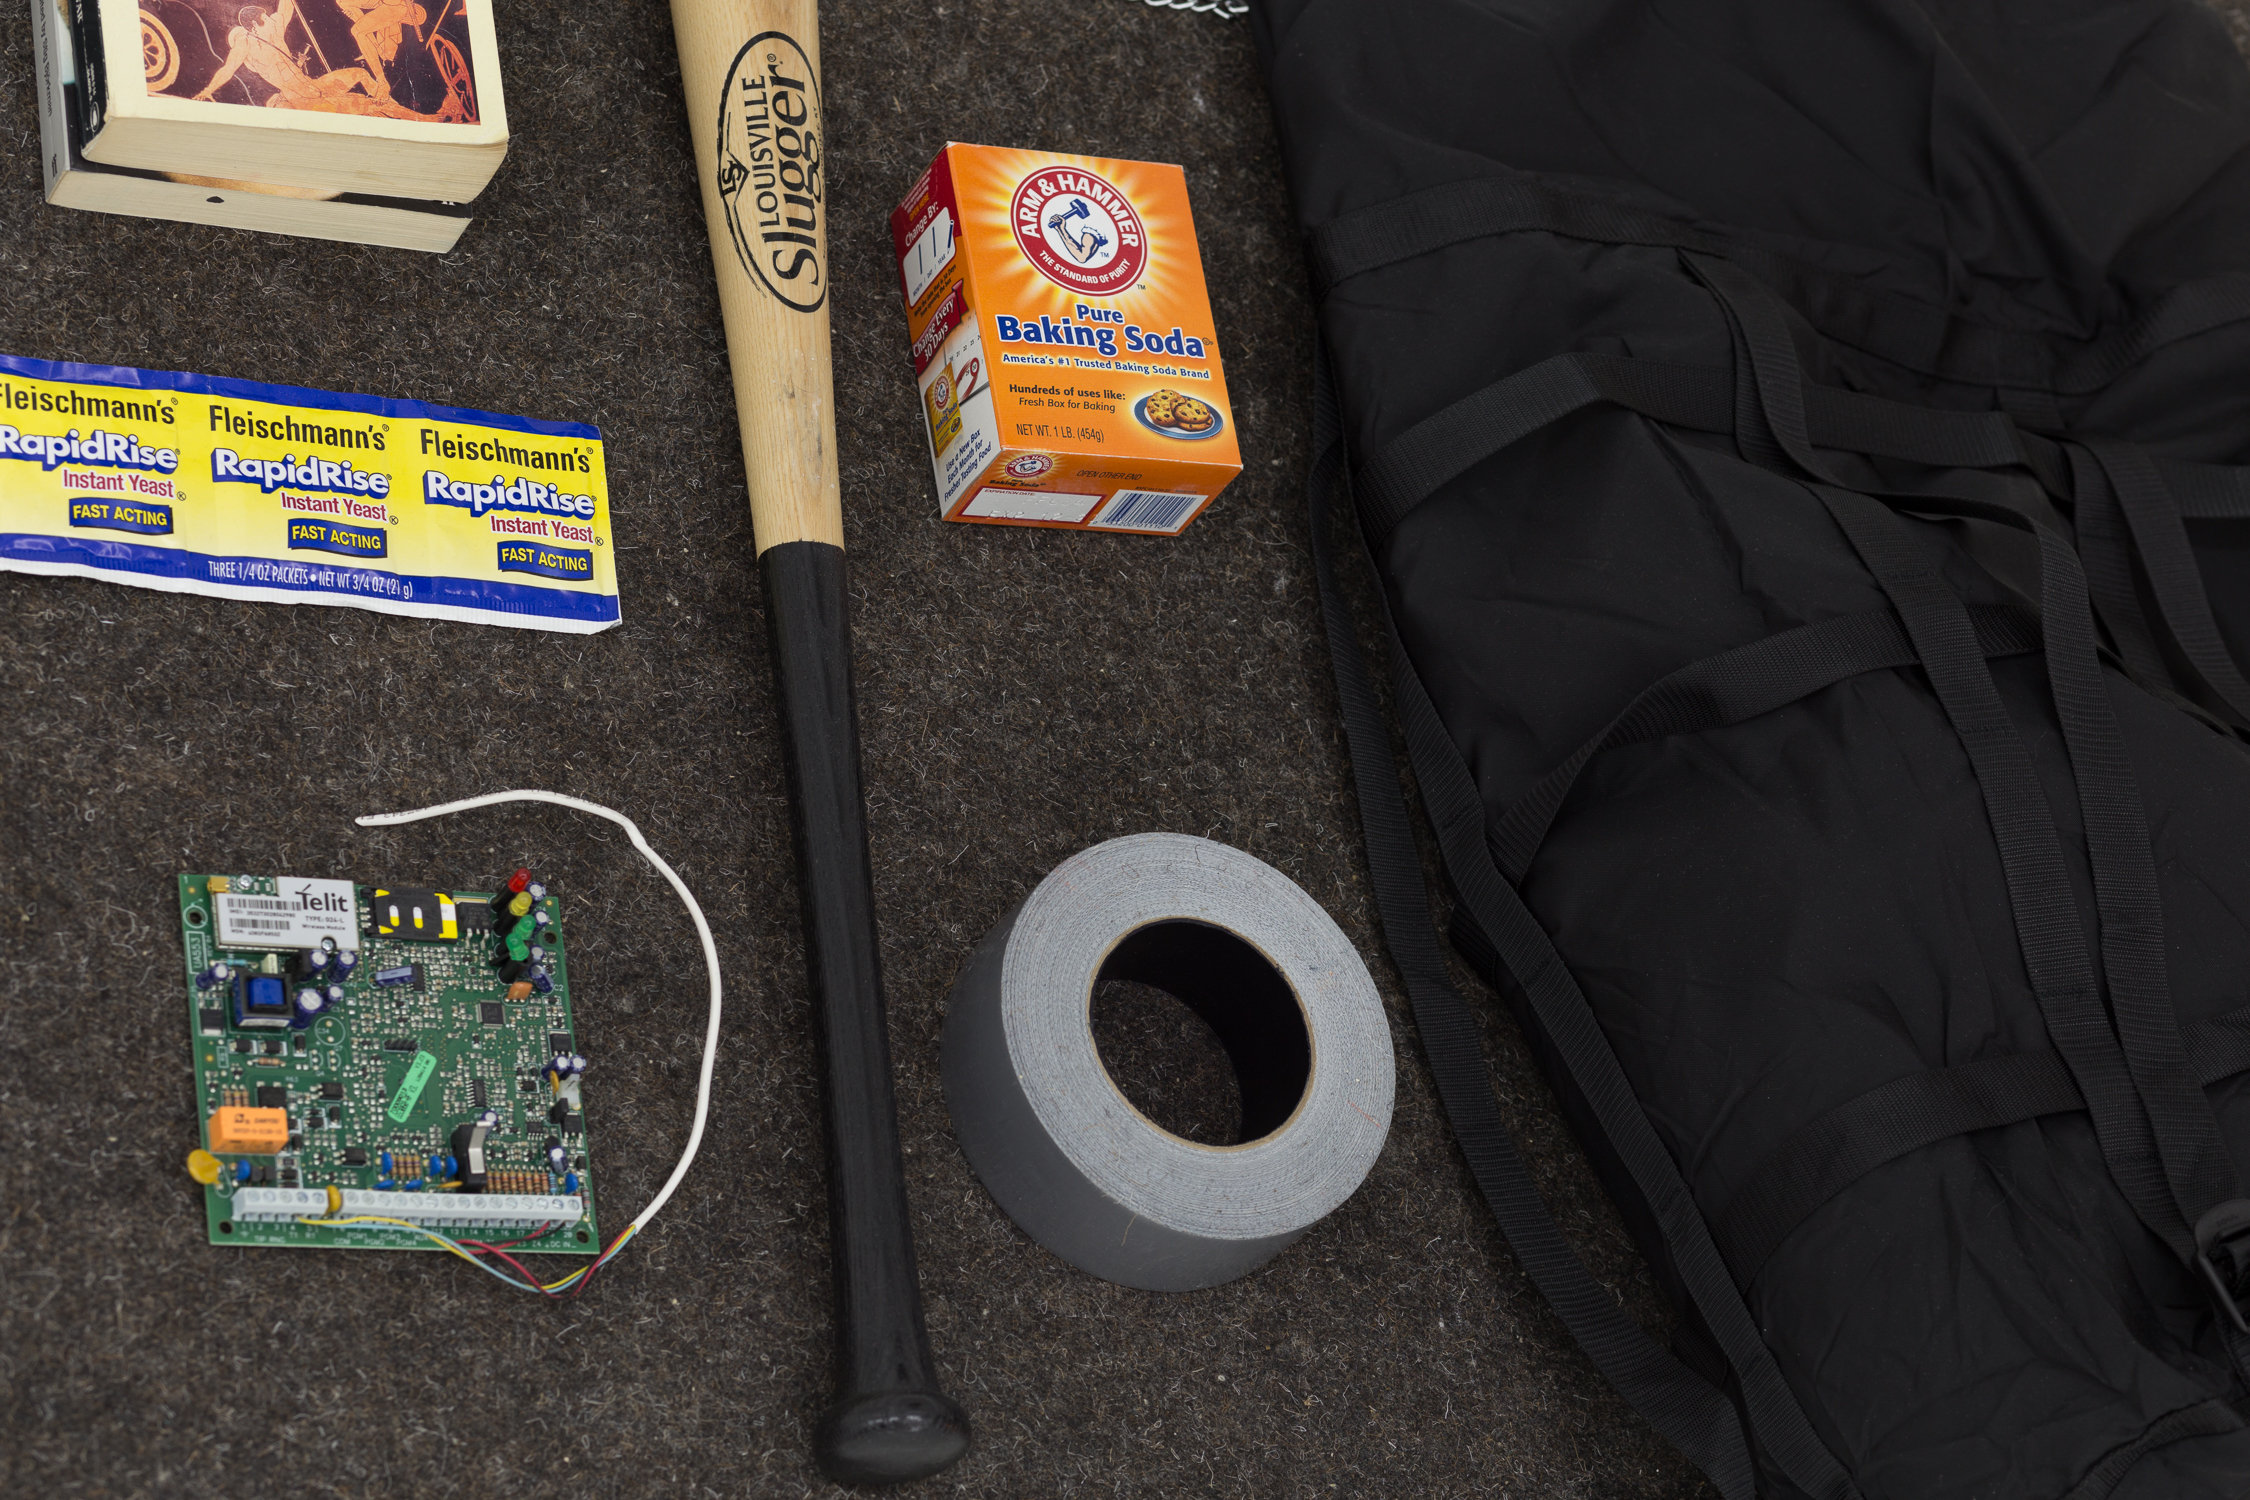 Items on gray felt: a carton of baking soda, a baseball bat, a roll of duct tape, a stack of books, computer parts, and several packets of RapidRise yeast